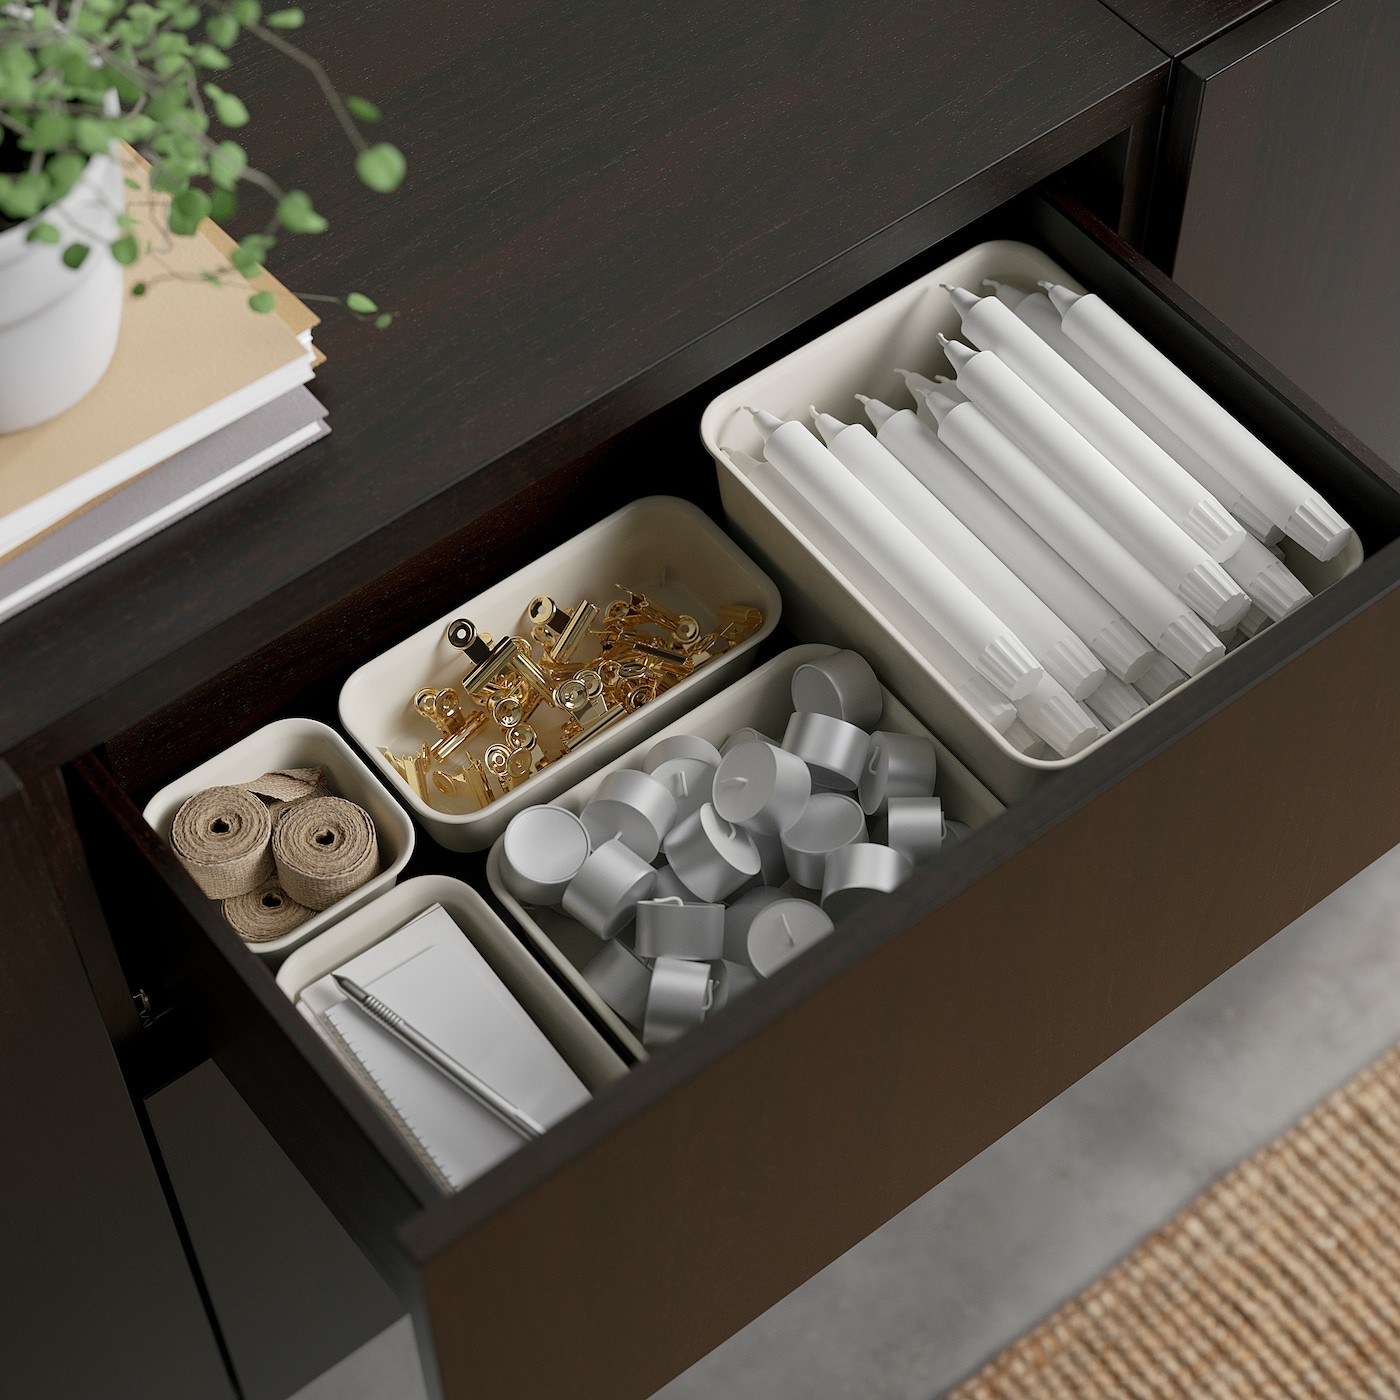 BESTÅ Storage combination with drawers